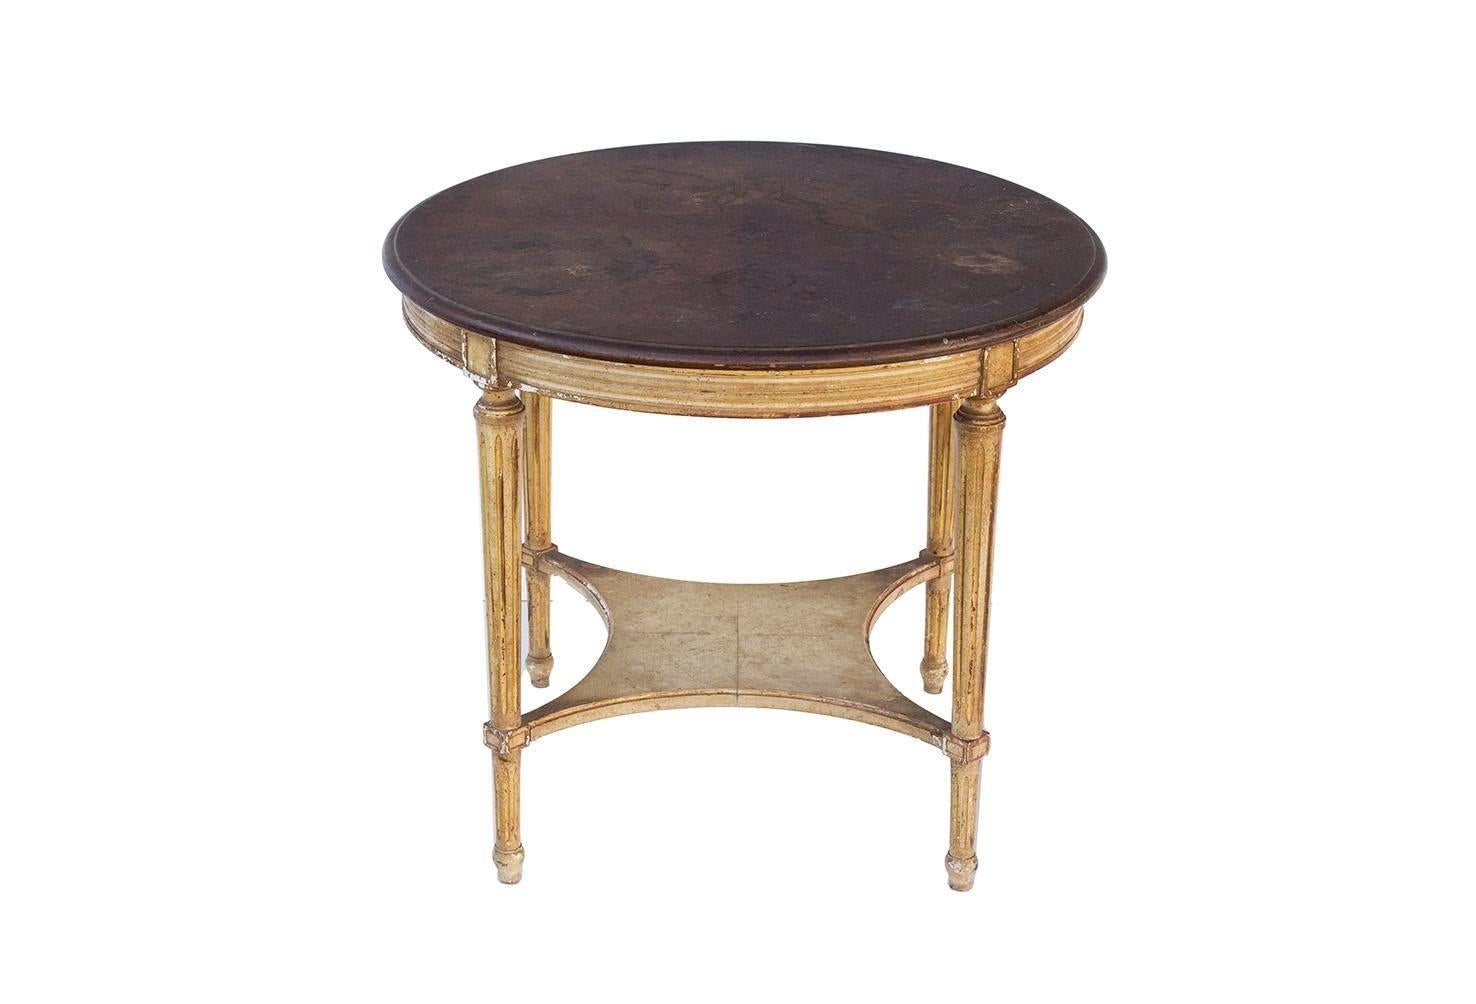 USA, 1940s
Round French style side table by John Widdicomb. Fluted legs and what appears to be a starburst walnut top. Retains metal label on underside.

CONDITION NOTES: Shows heavy, chippy wear.

DIMENSIONS: 26